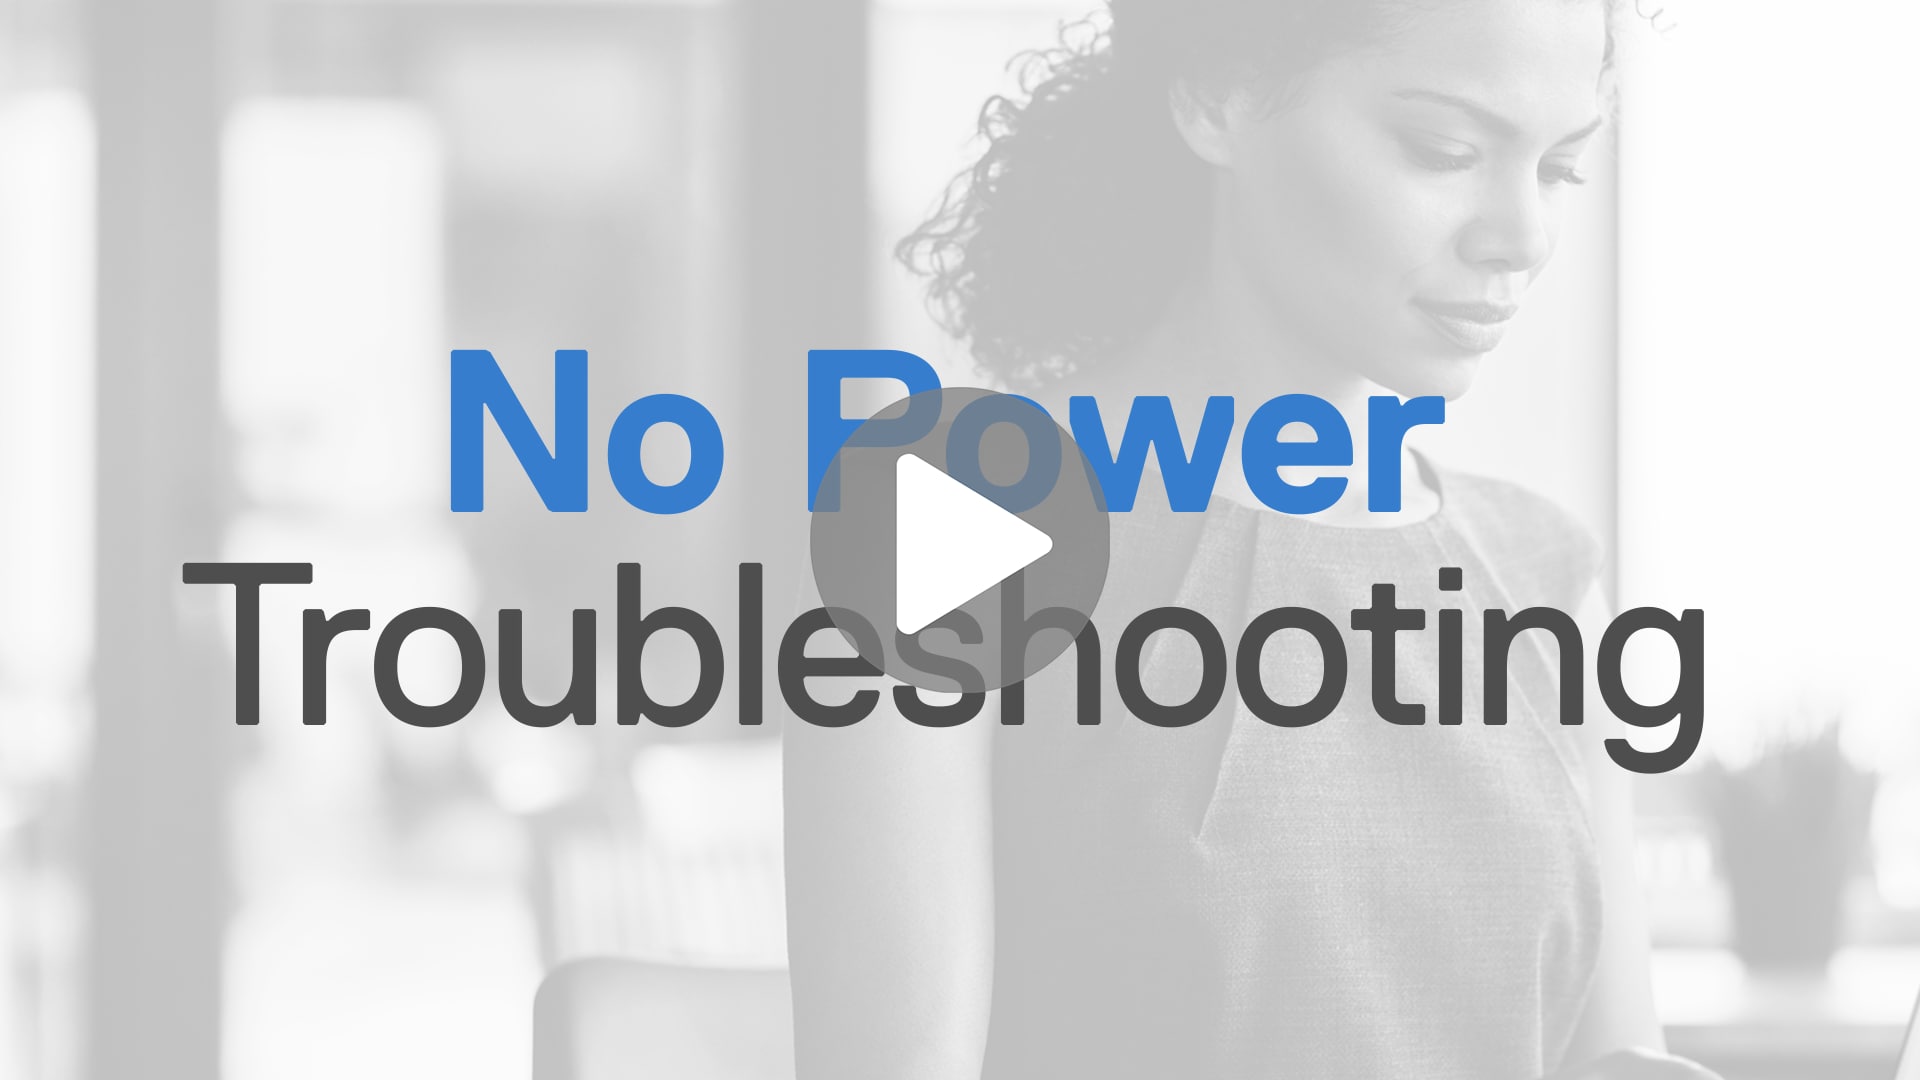 No power troubleshooting video